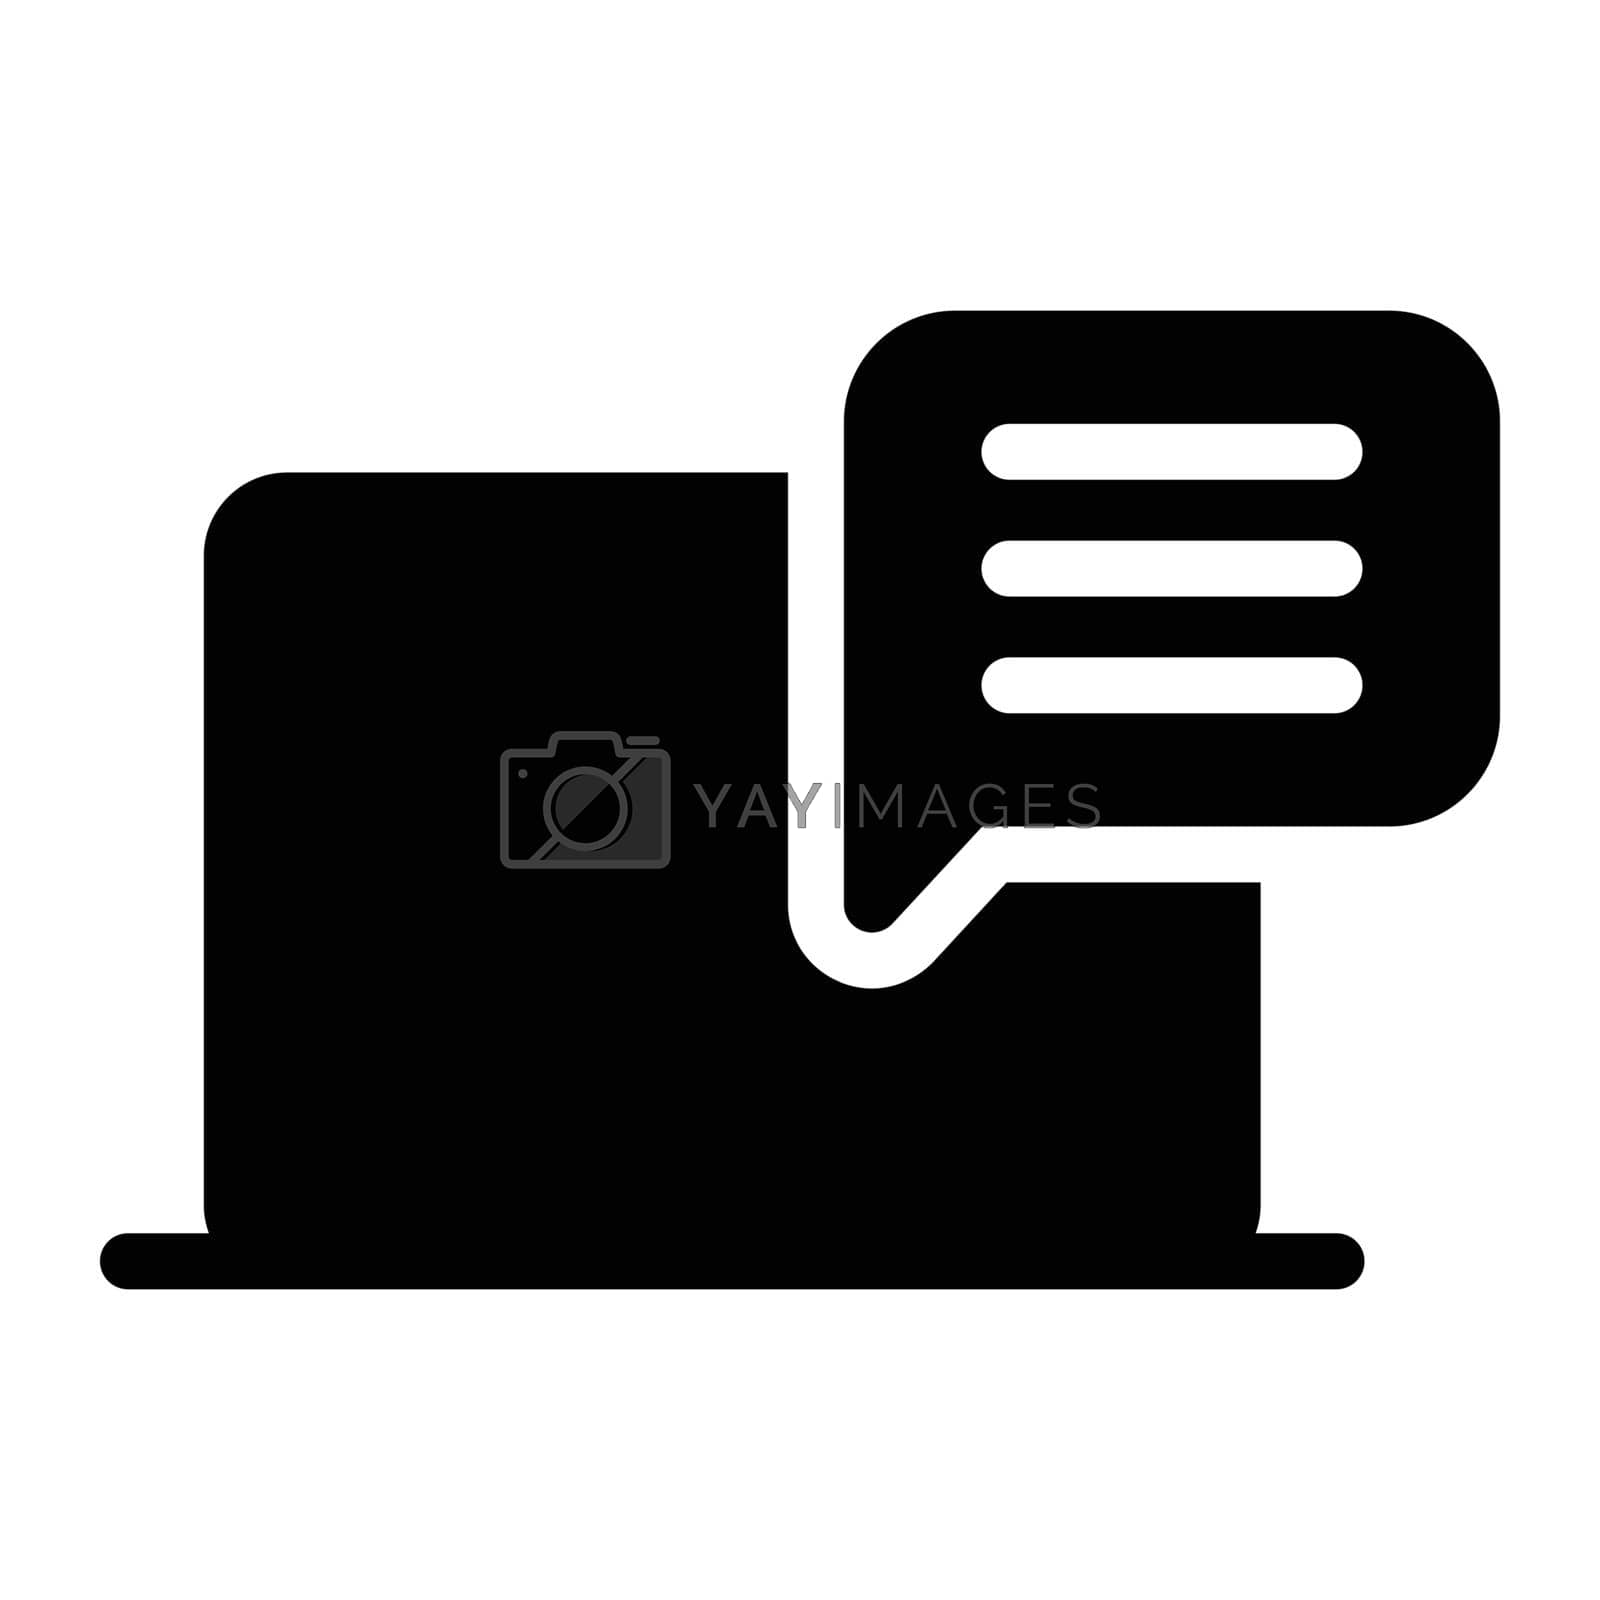 Royalty free image of chat by FlaticonsDesign